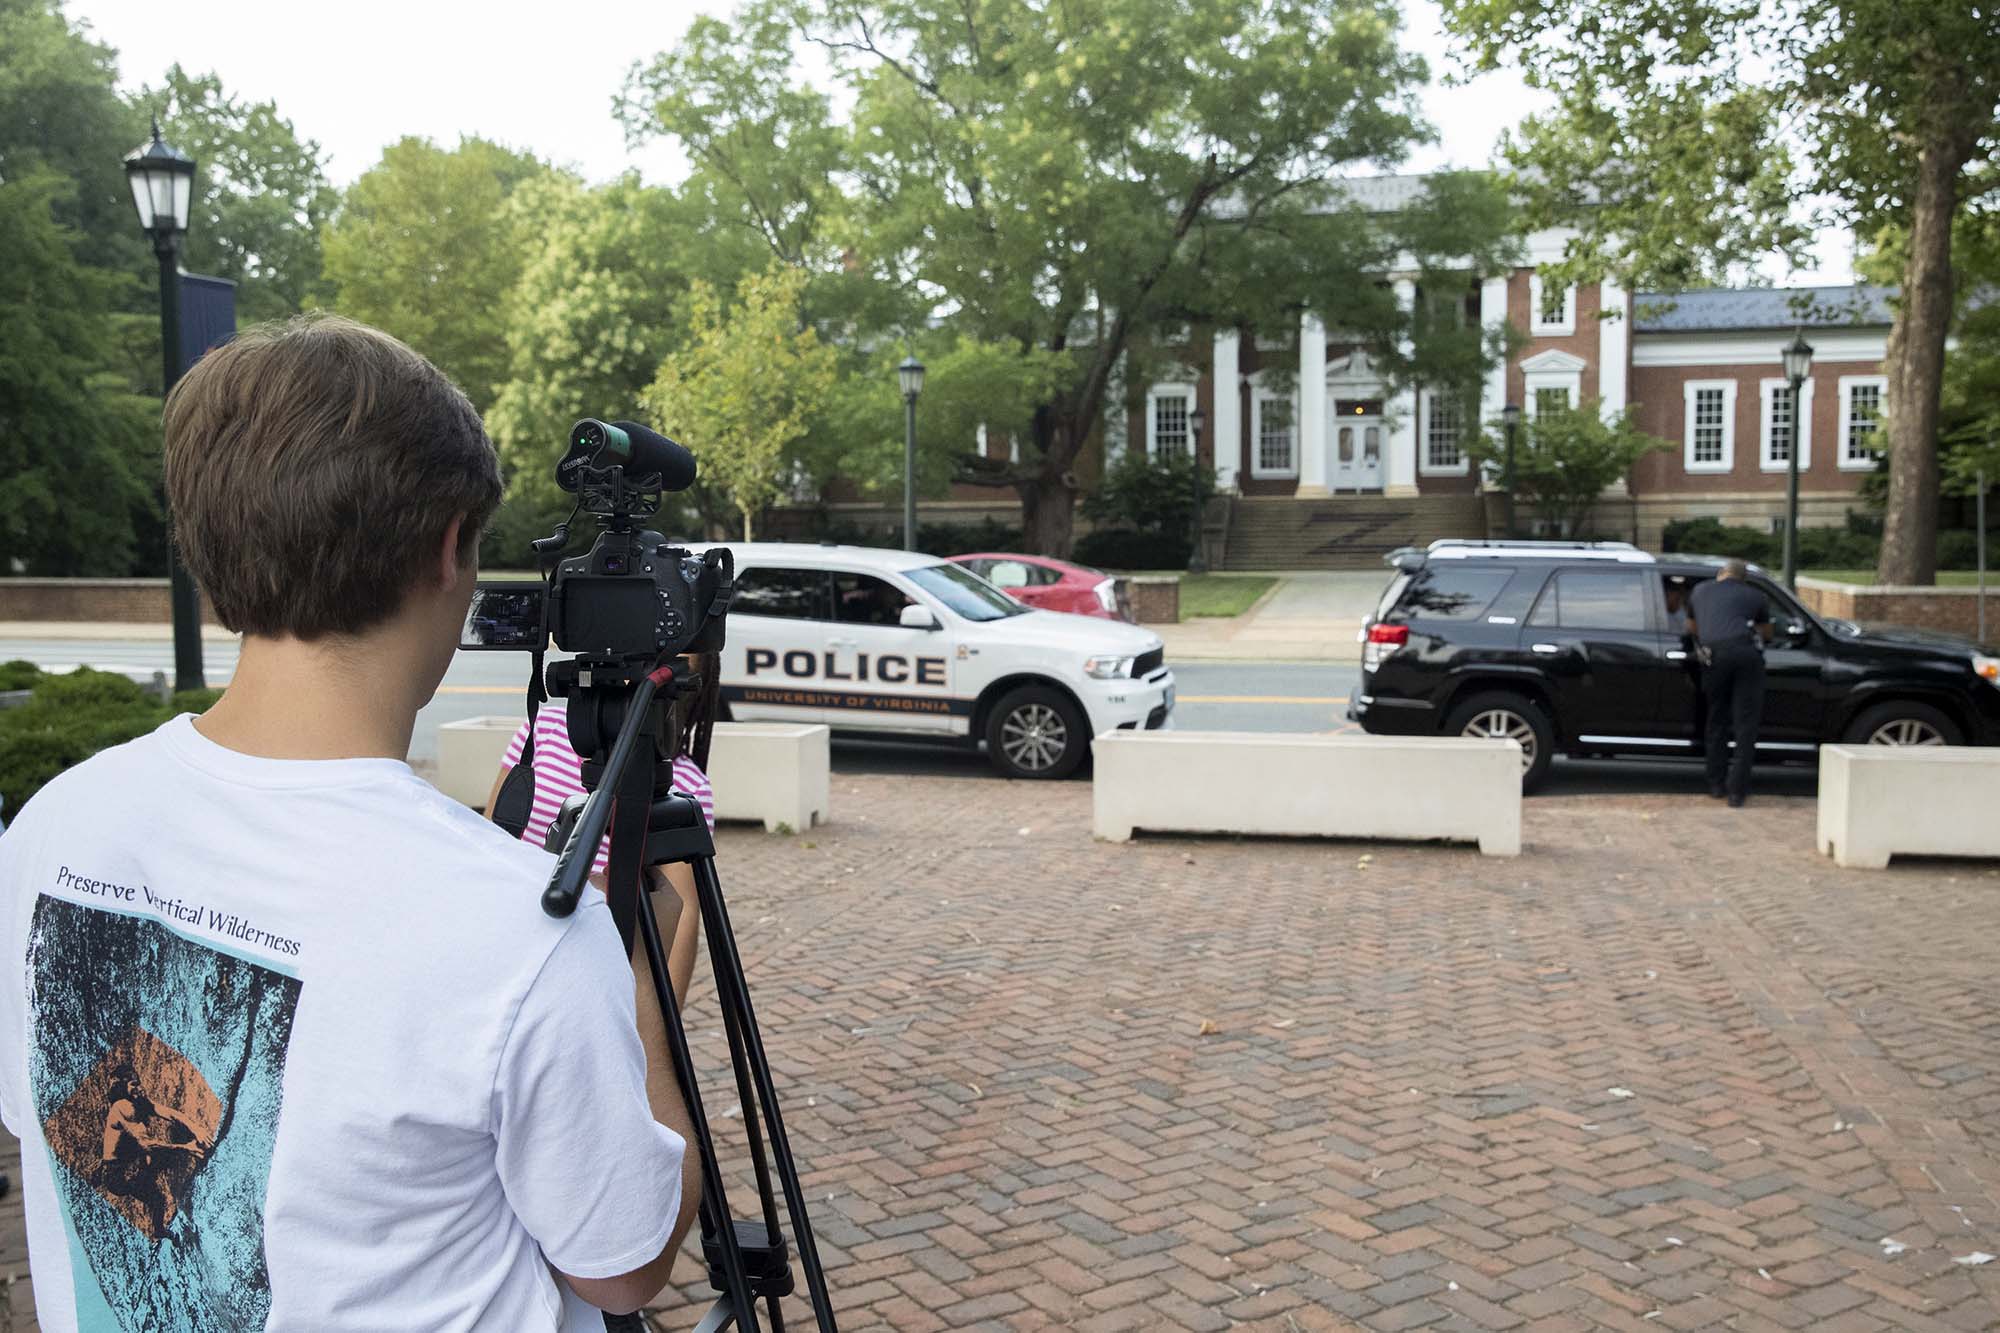 Student films staffed police traffic stop on Grounds